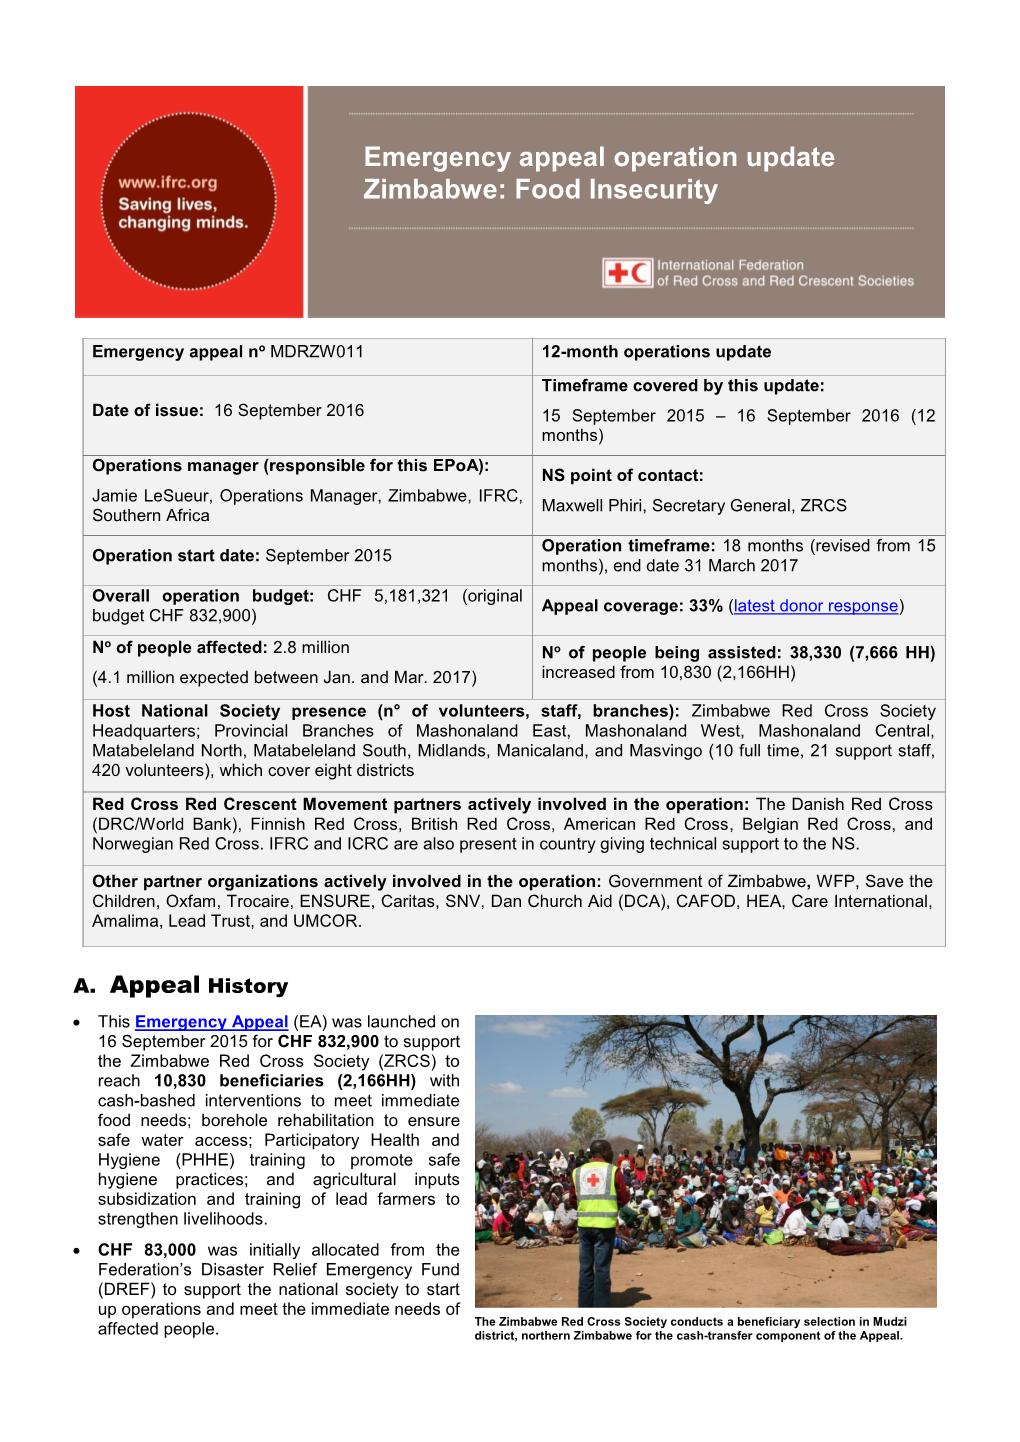 Emergency Appeal Operation Update Zimbabwe: Food Insecurity